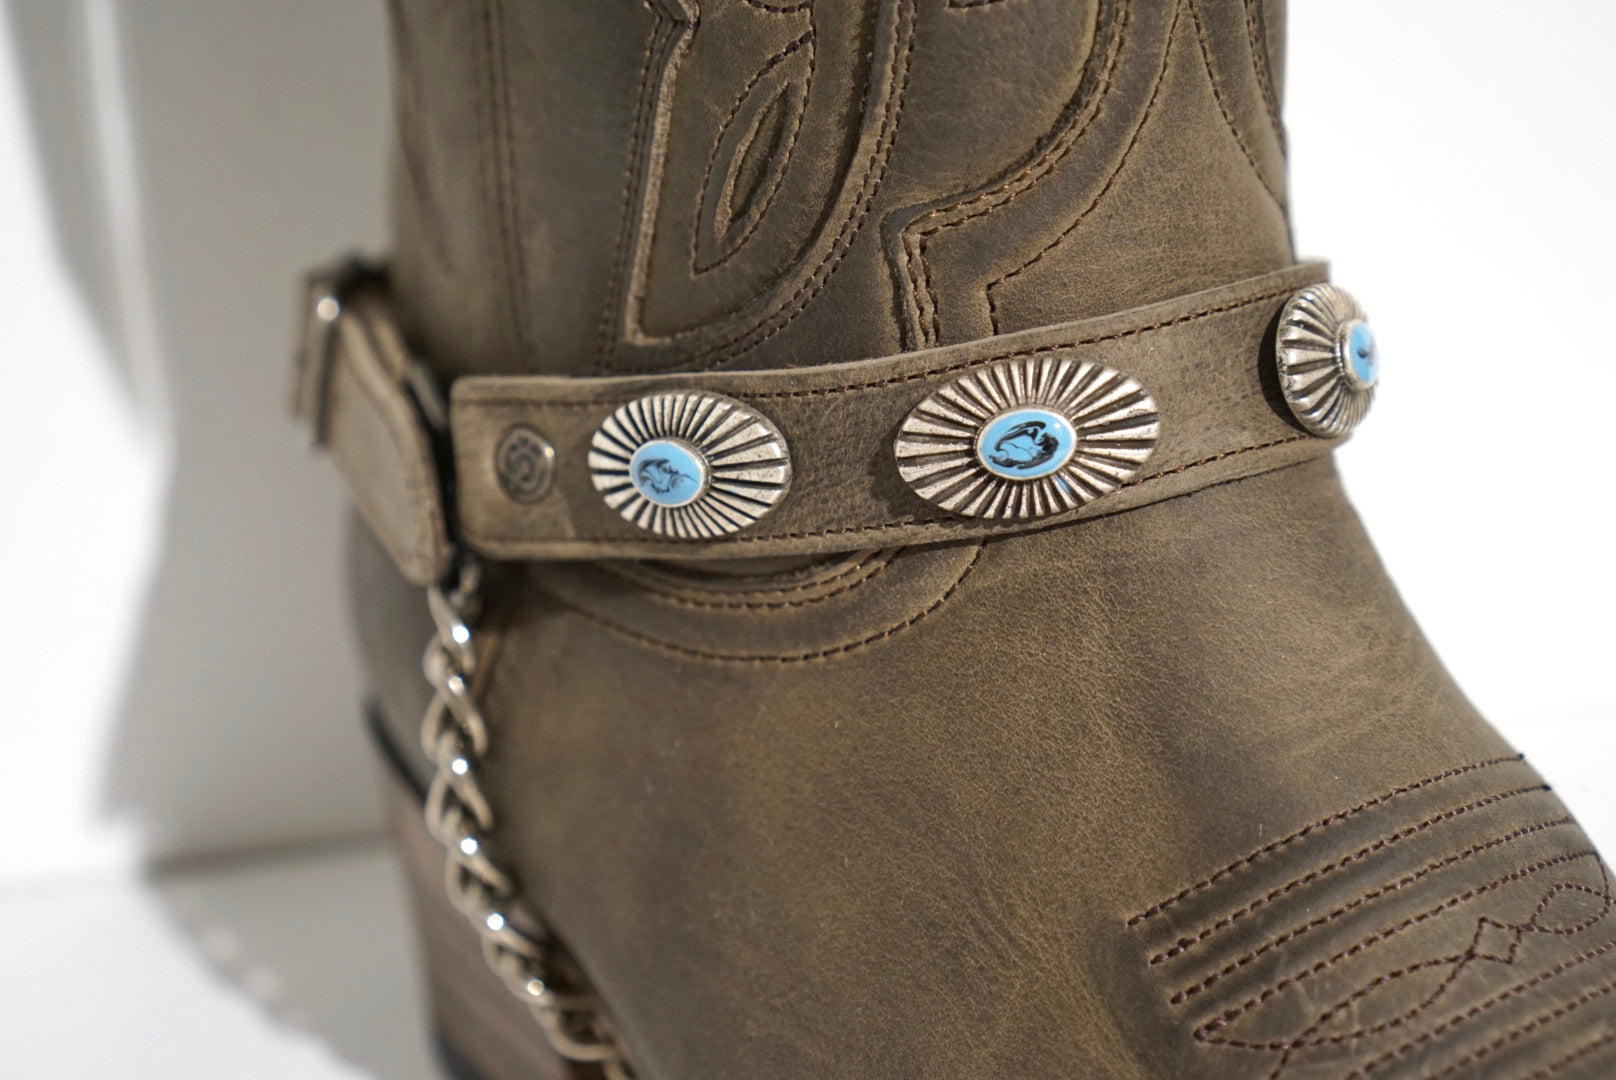 Sendra spurs - taupe with turquoise accents